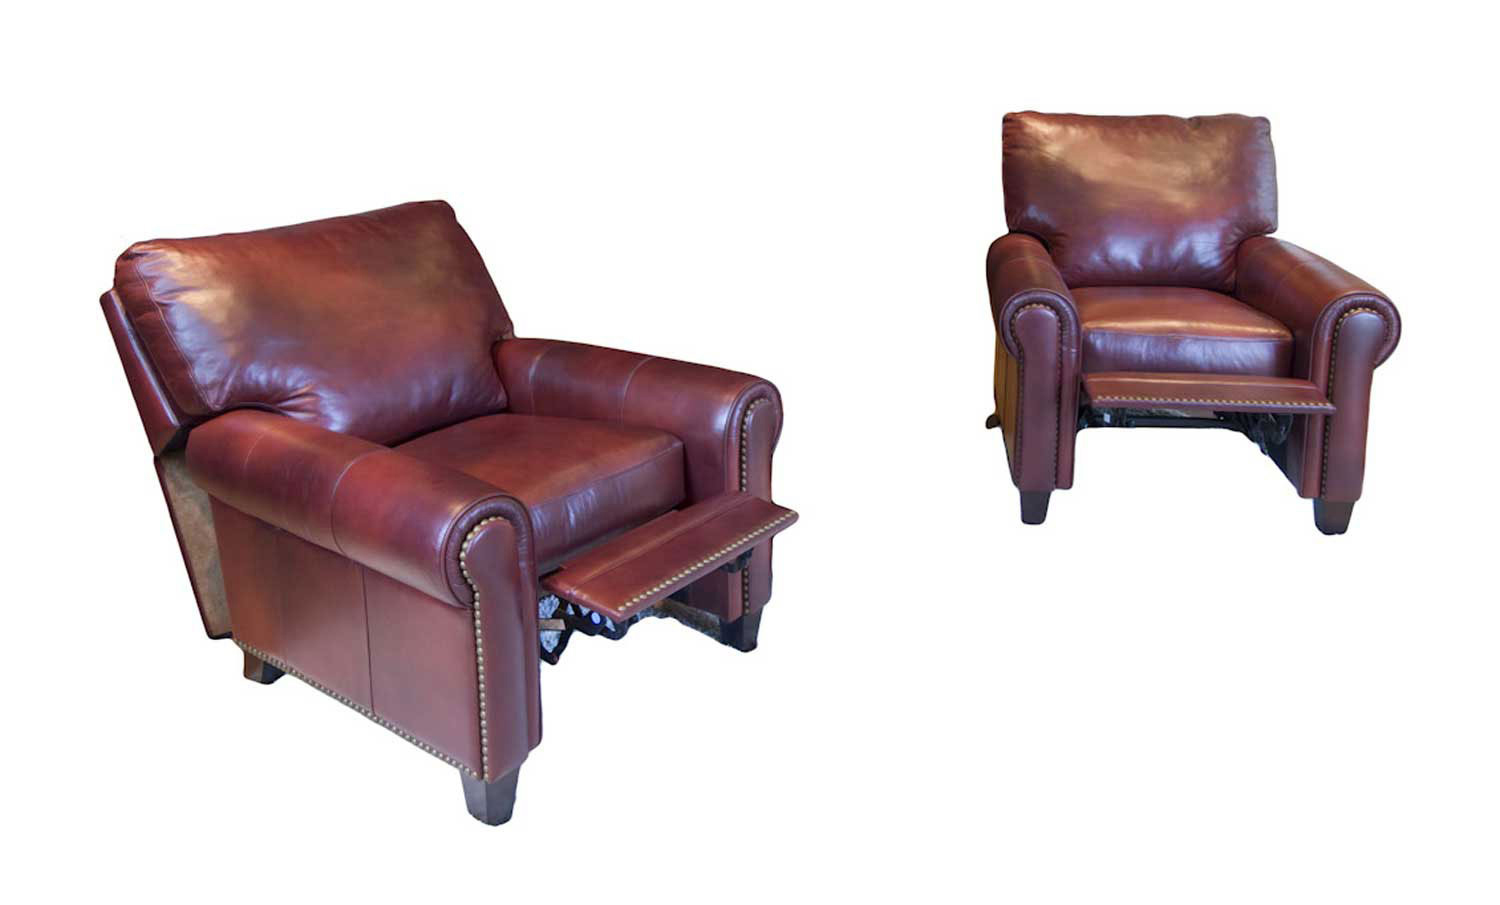 ELEMENTS Fine Home Furnishings Garret 2-Piece Set Top Grain Leather Reclining Chairs - Sienna